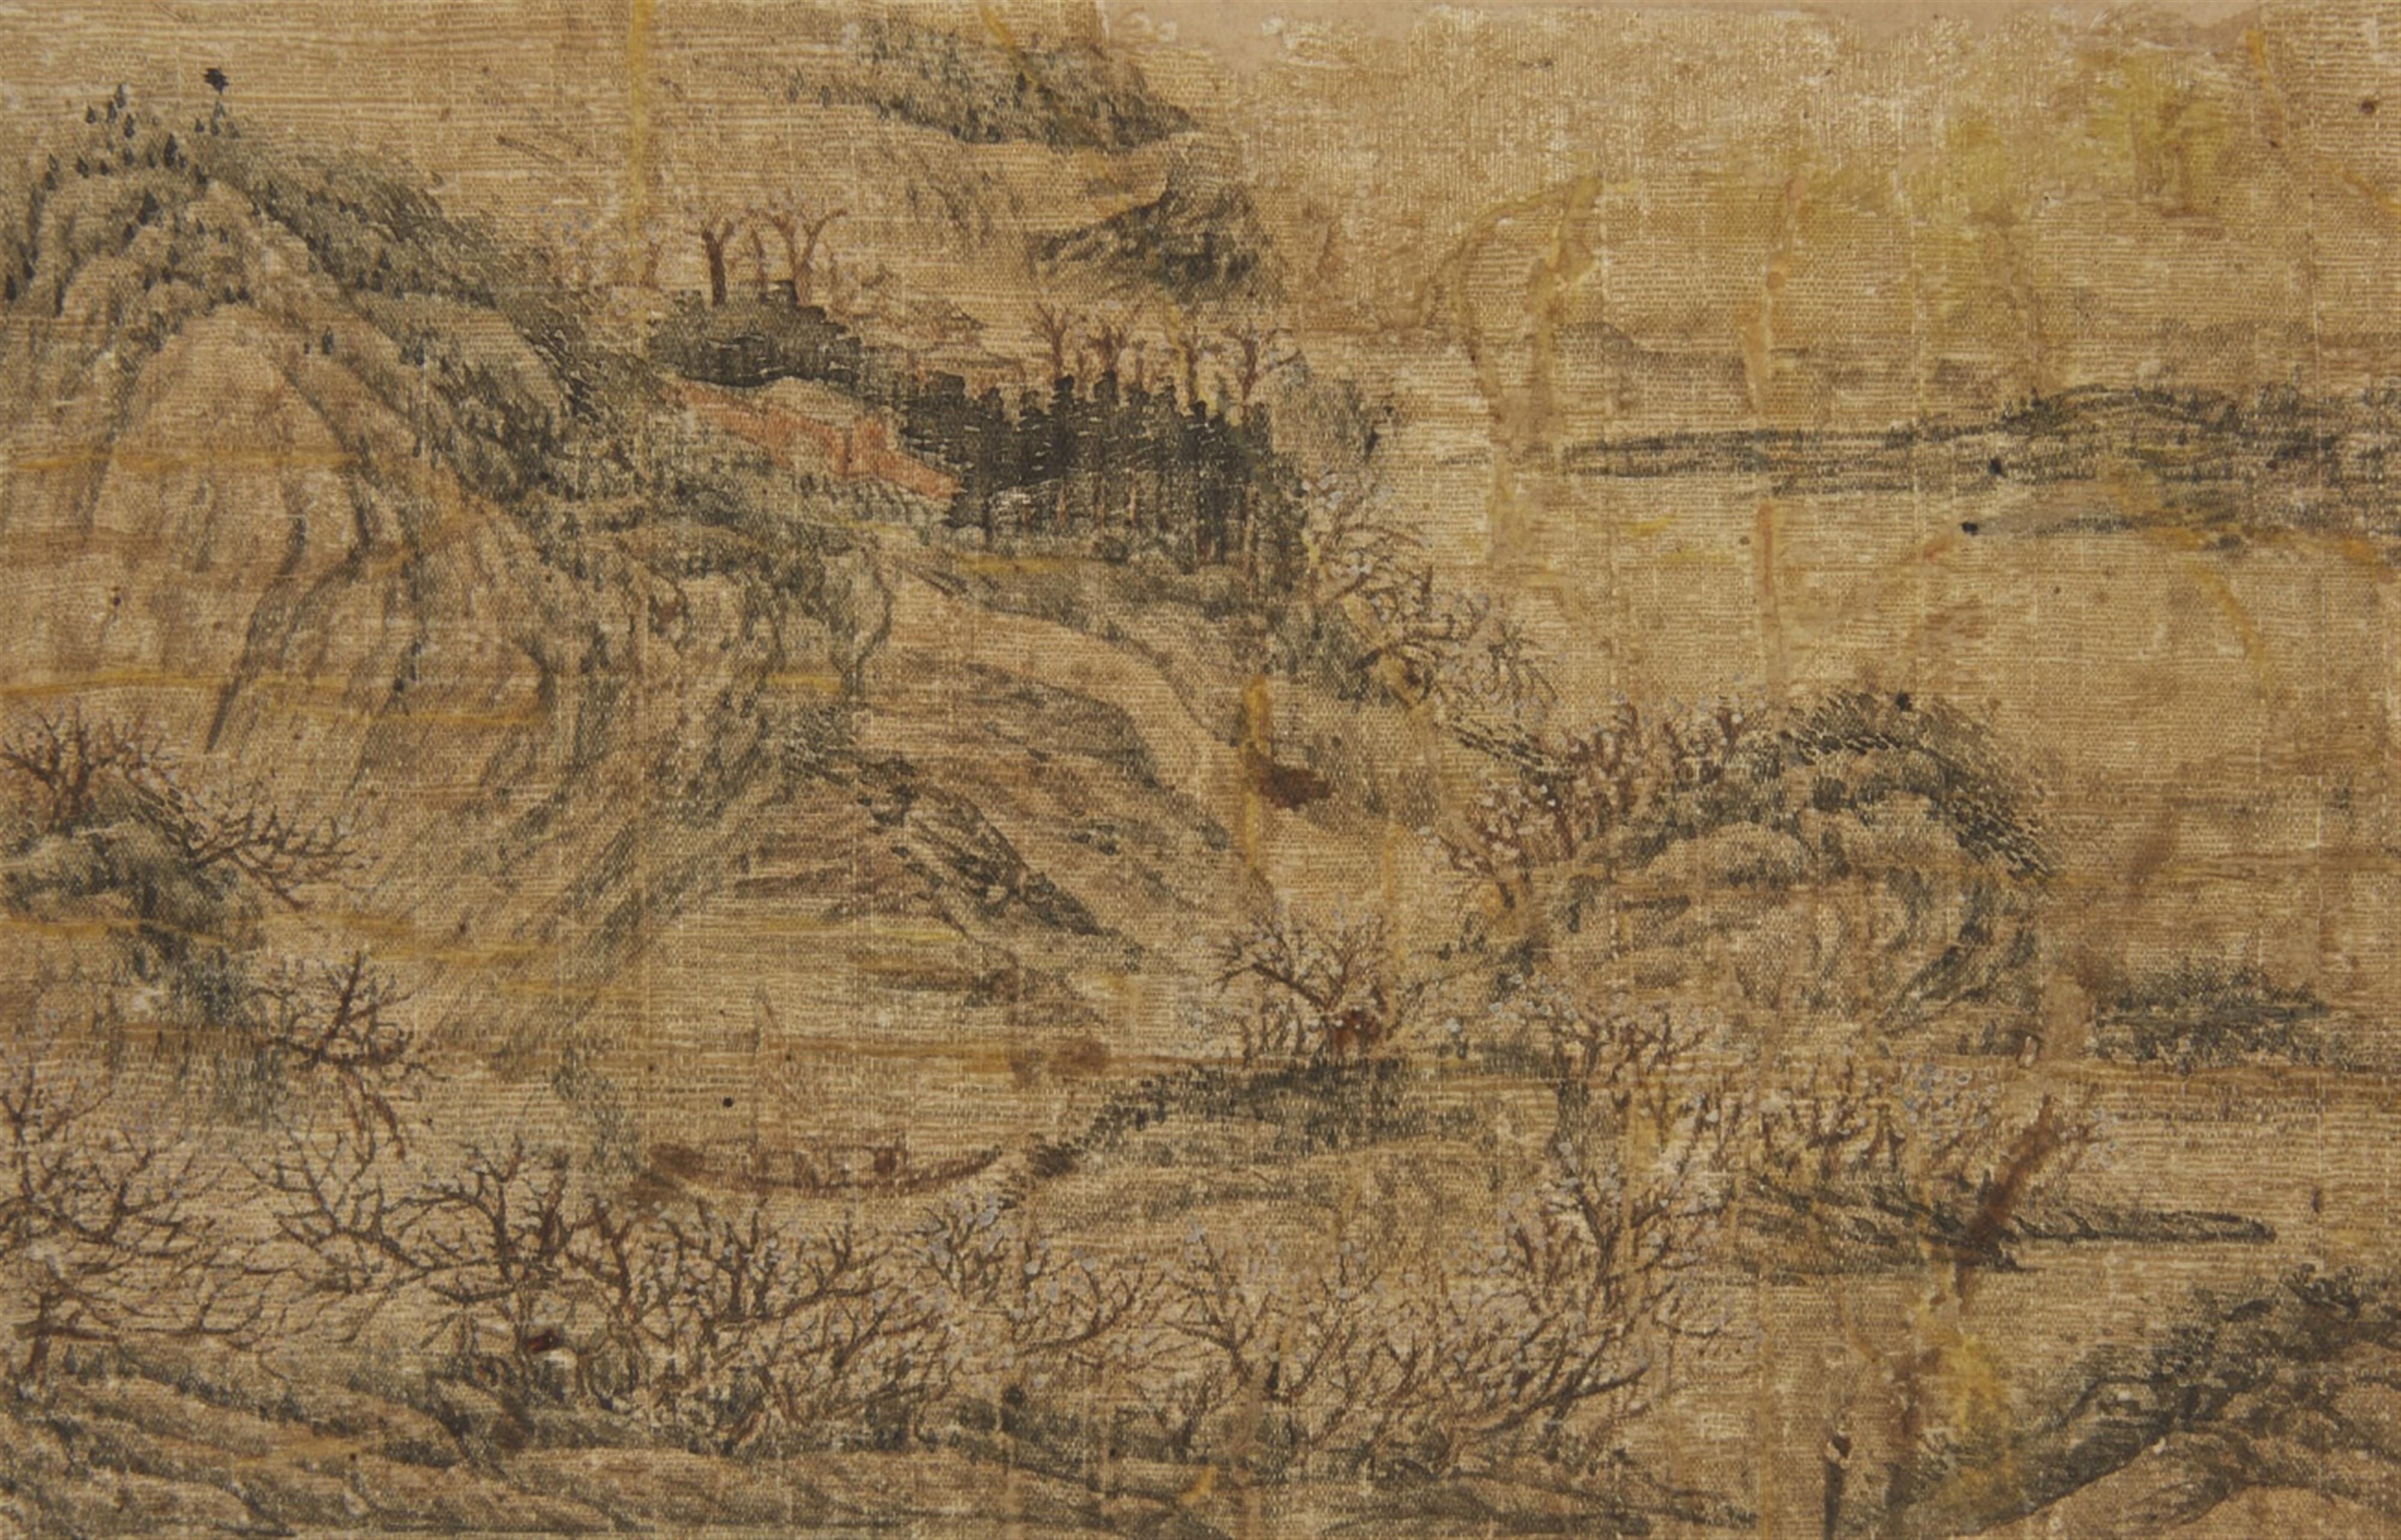 Qian Gu, in the manner of - An album titled "Ming Qian Gu shanshui ce" with six double-leaves, depicting landscapes in the manner of Qian Gu (1508-1578). Water damages. Cloth-covered covers. - image-2